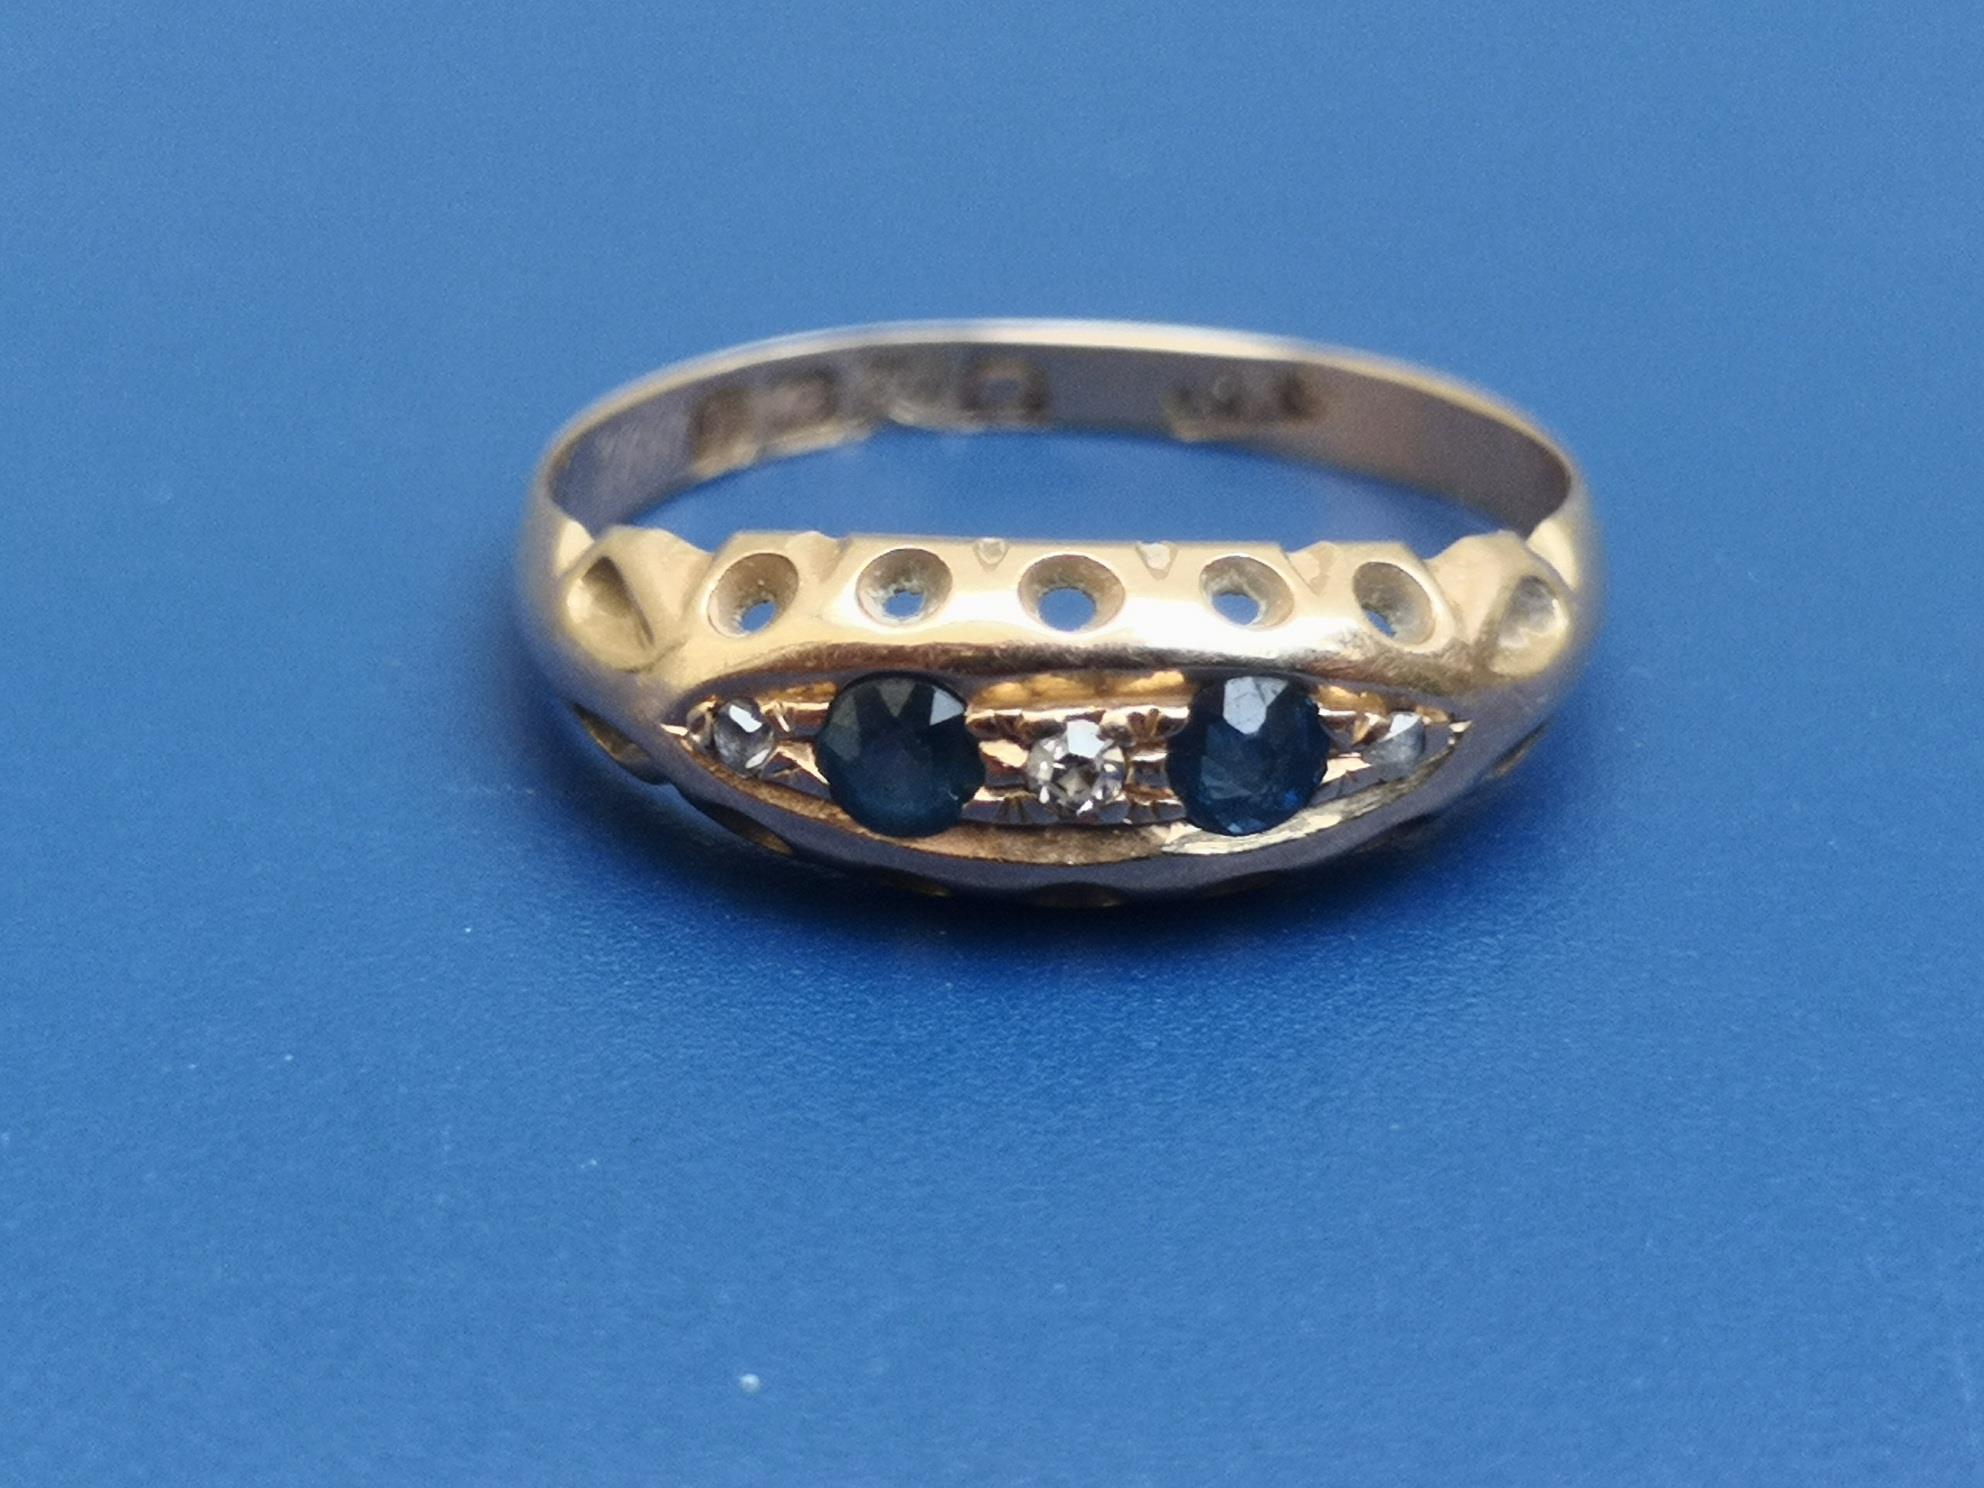 A small five stone sapphire & diamond set 18ct gold ring - Birmingham marks for 1915. Finger size